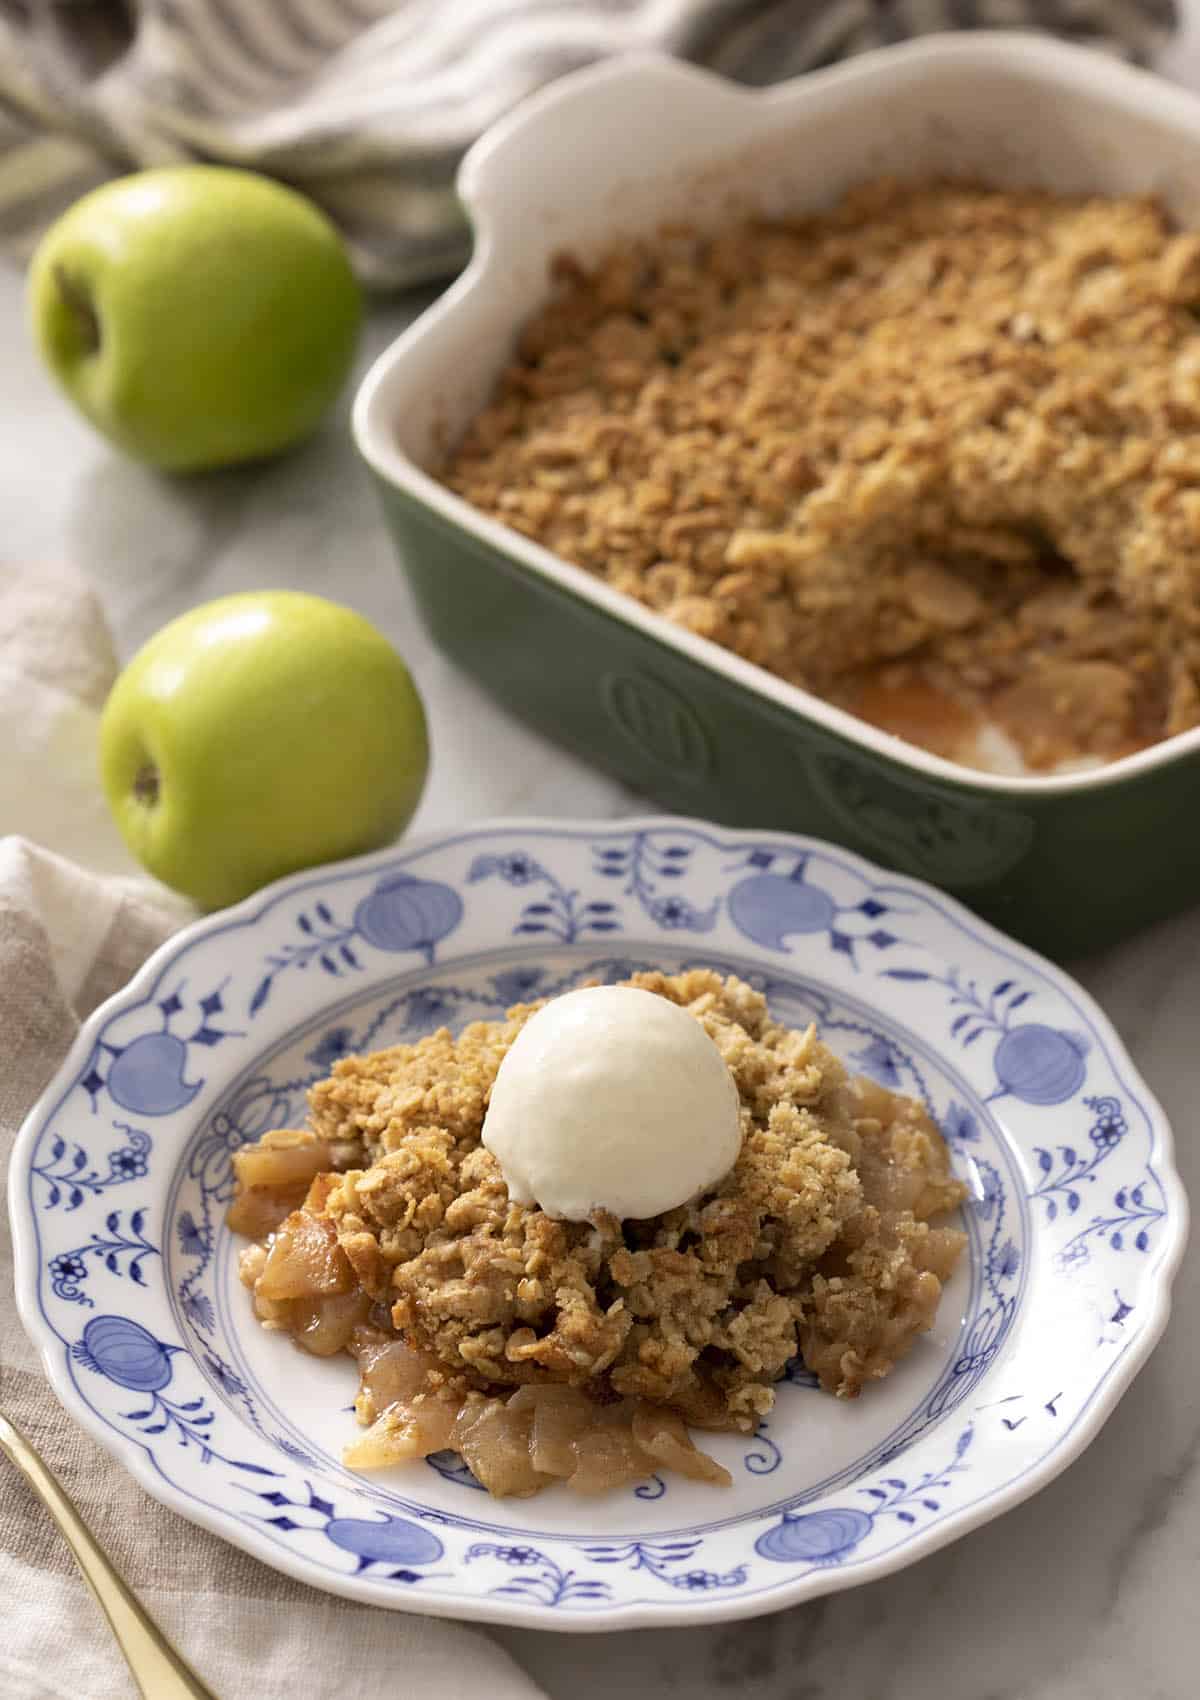 A portion of apple crisp with ice cream on a blue and white plate.